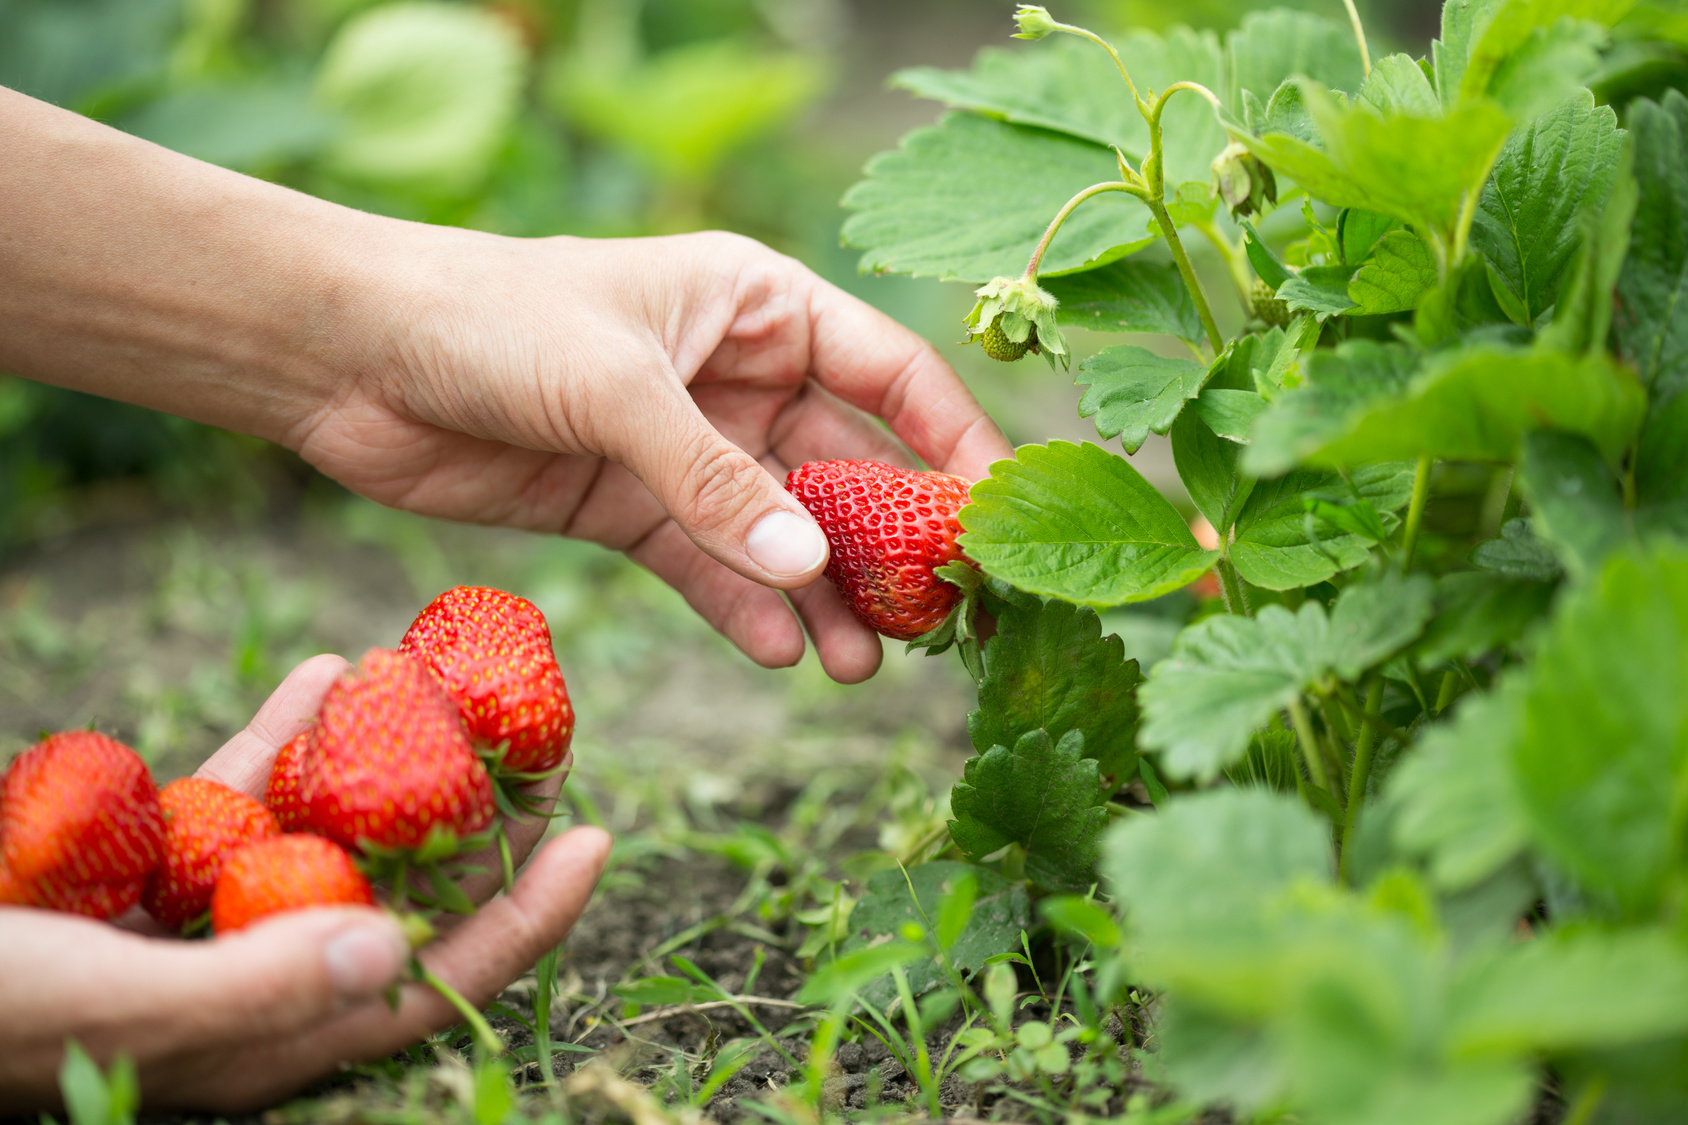 Strawberry plant care - do you have to fertilize them?